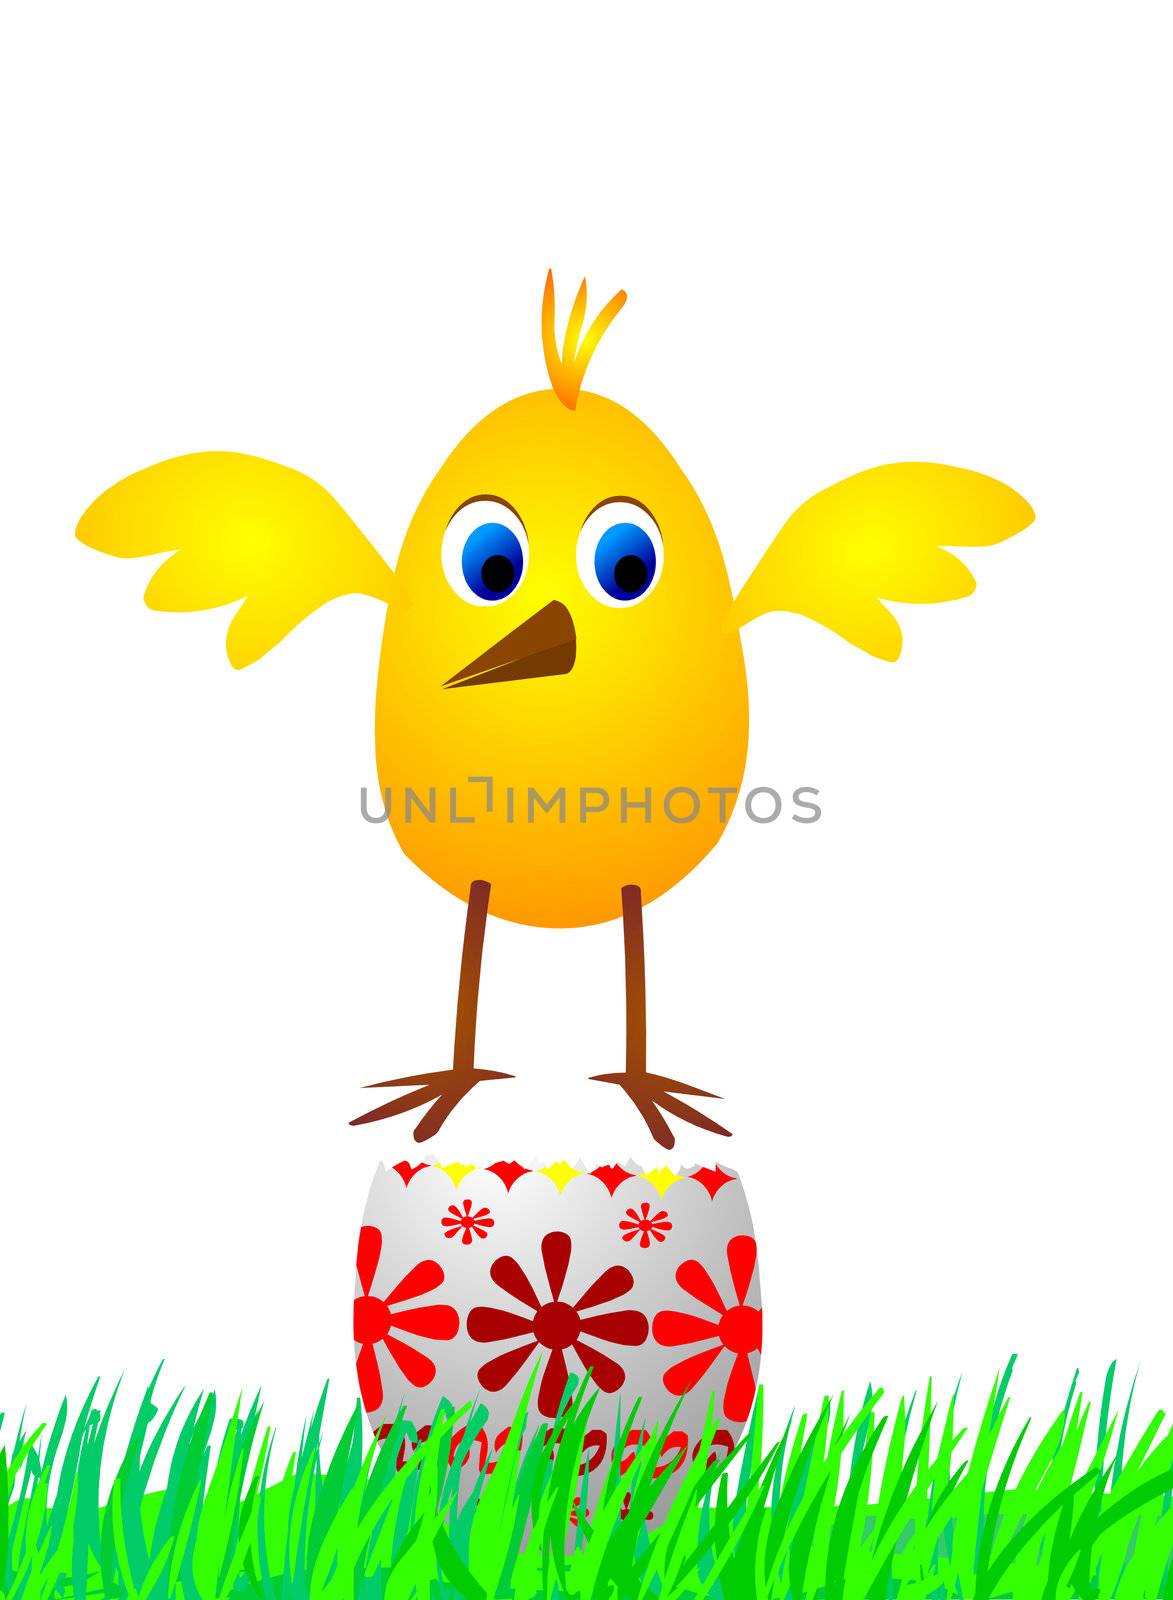 Illustration of the chick jumping from Easter egg - cartoon drawing